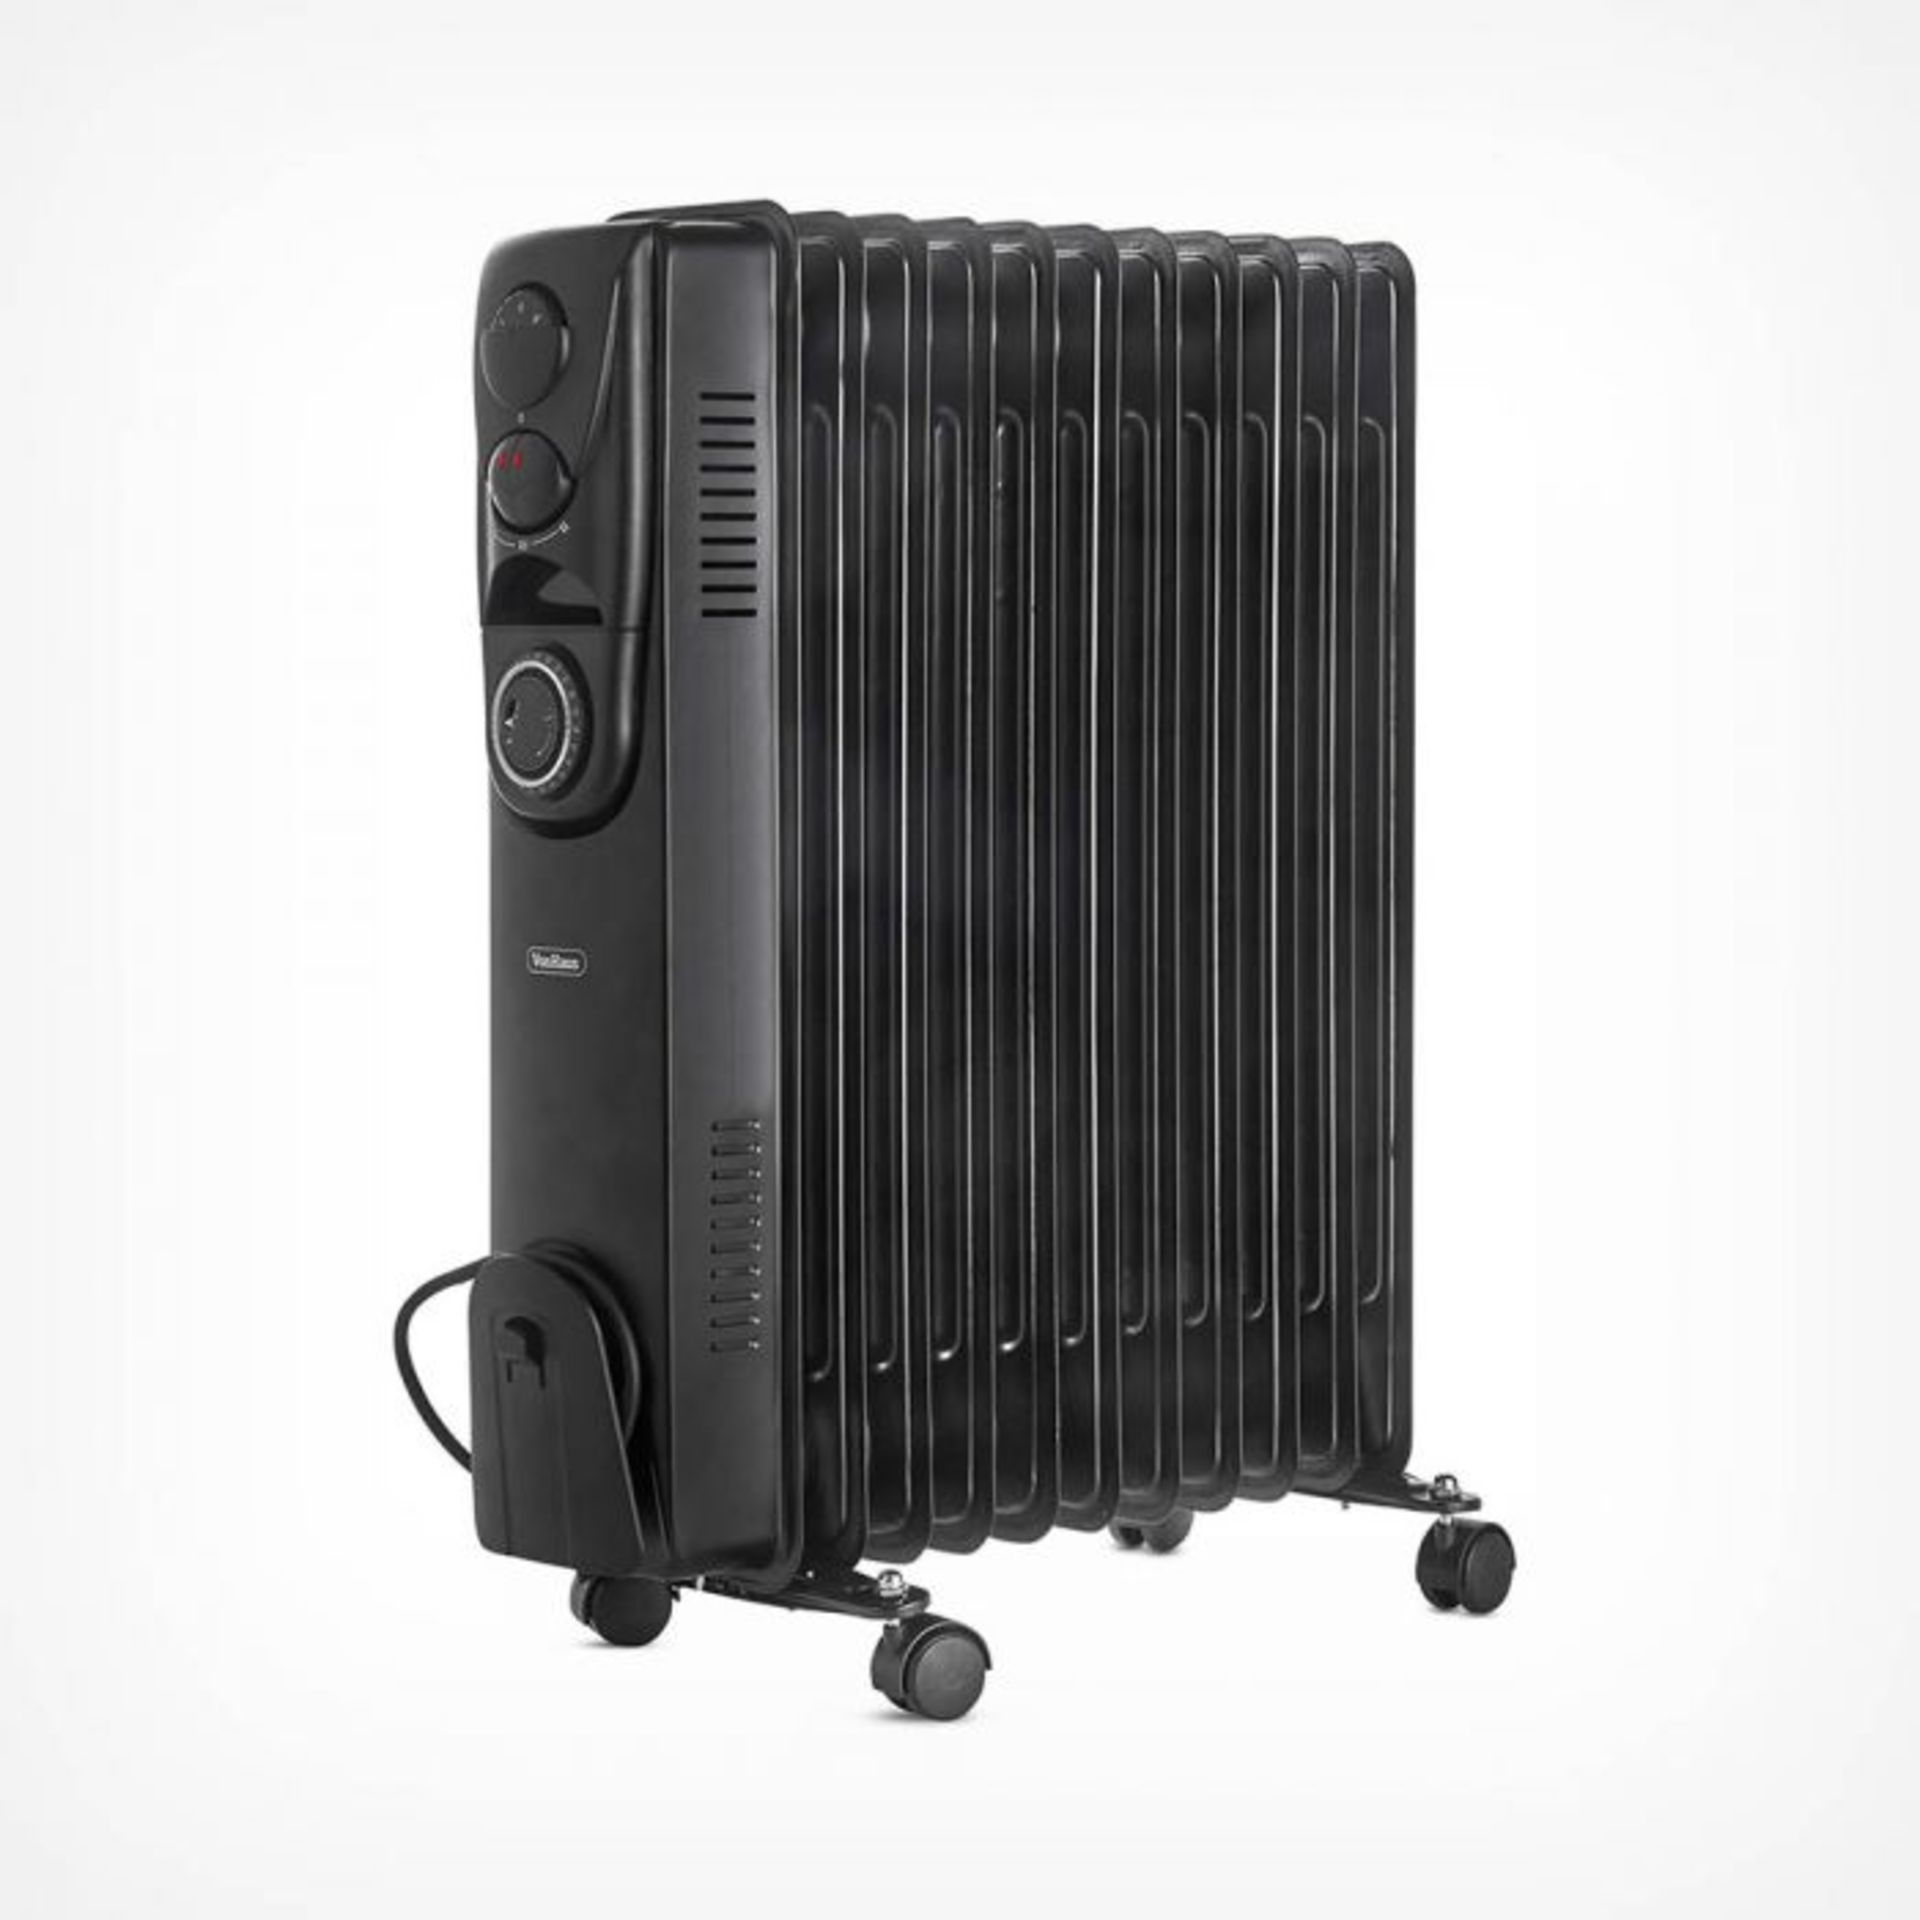 (V26) 11 Fin 2500W Oil Filled Radiator - Black 2500W radiator with 11 oil-filled fins for heat... - Image 2 of 4